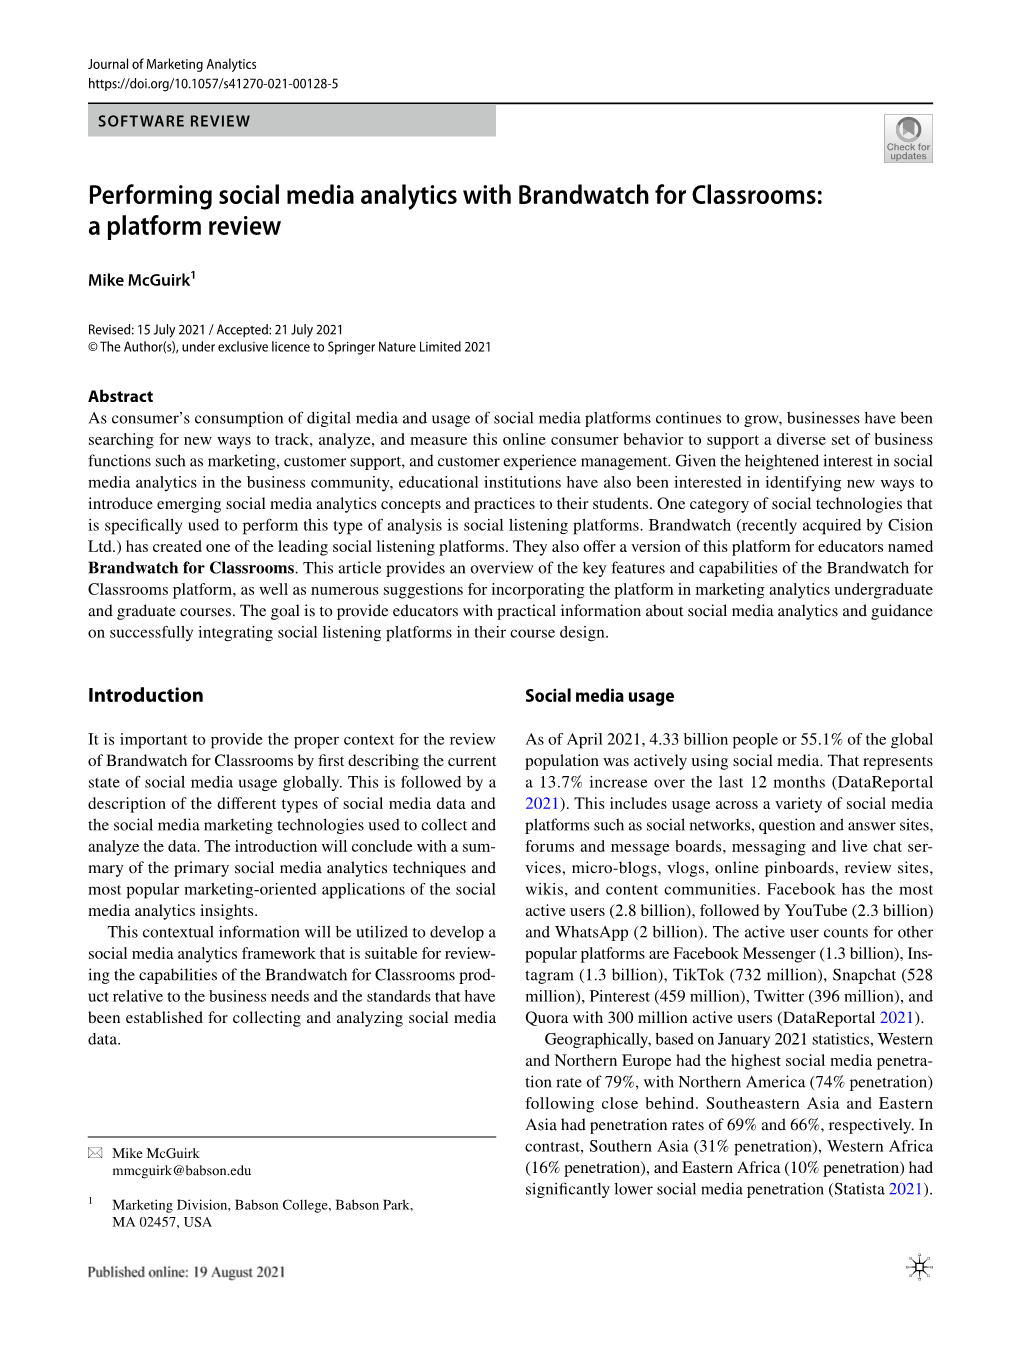 Performing Social Media Analytics with Brandwatch for Classrooms: a Platform Review